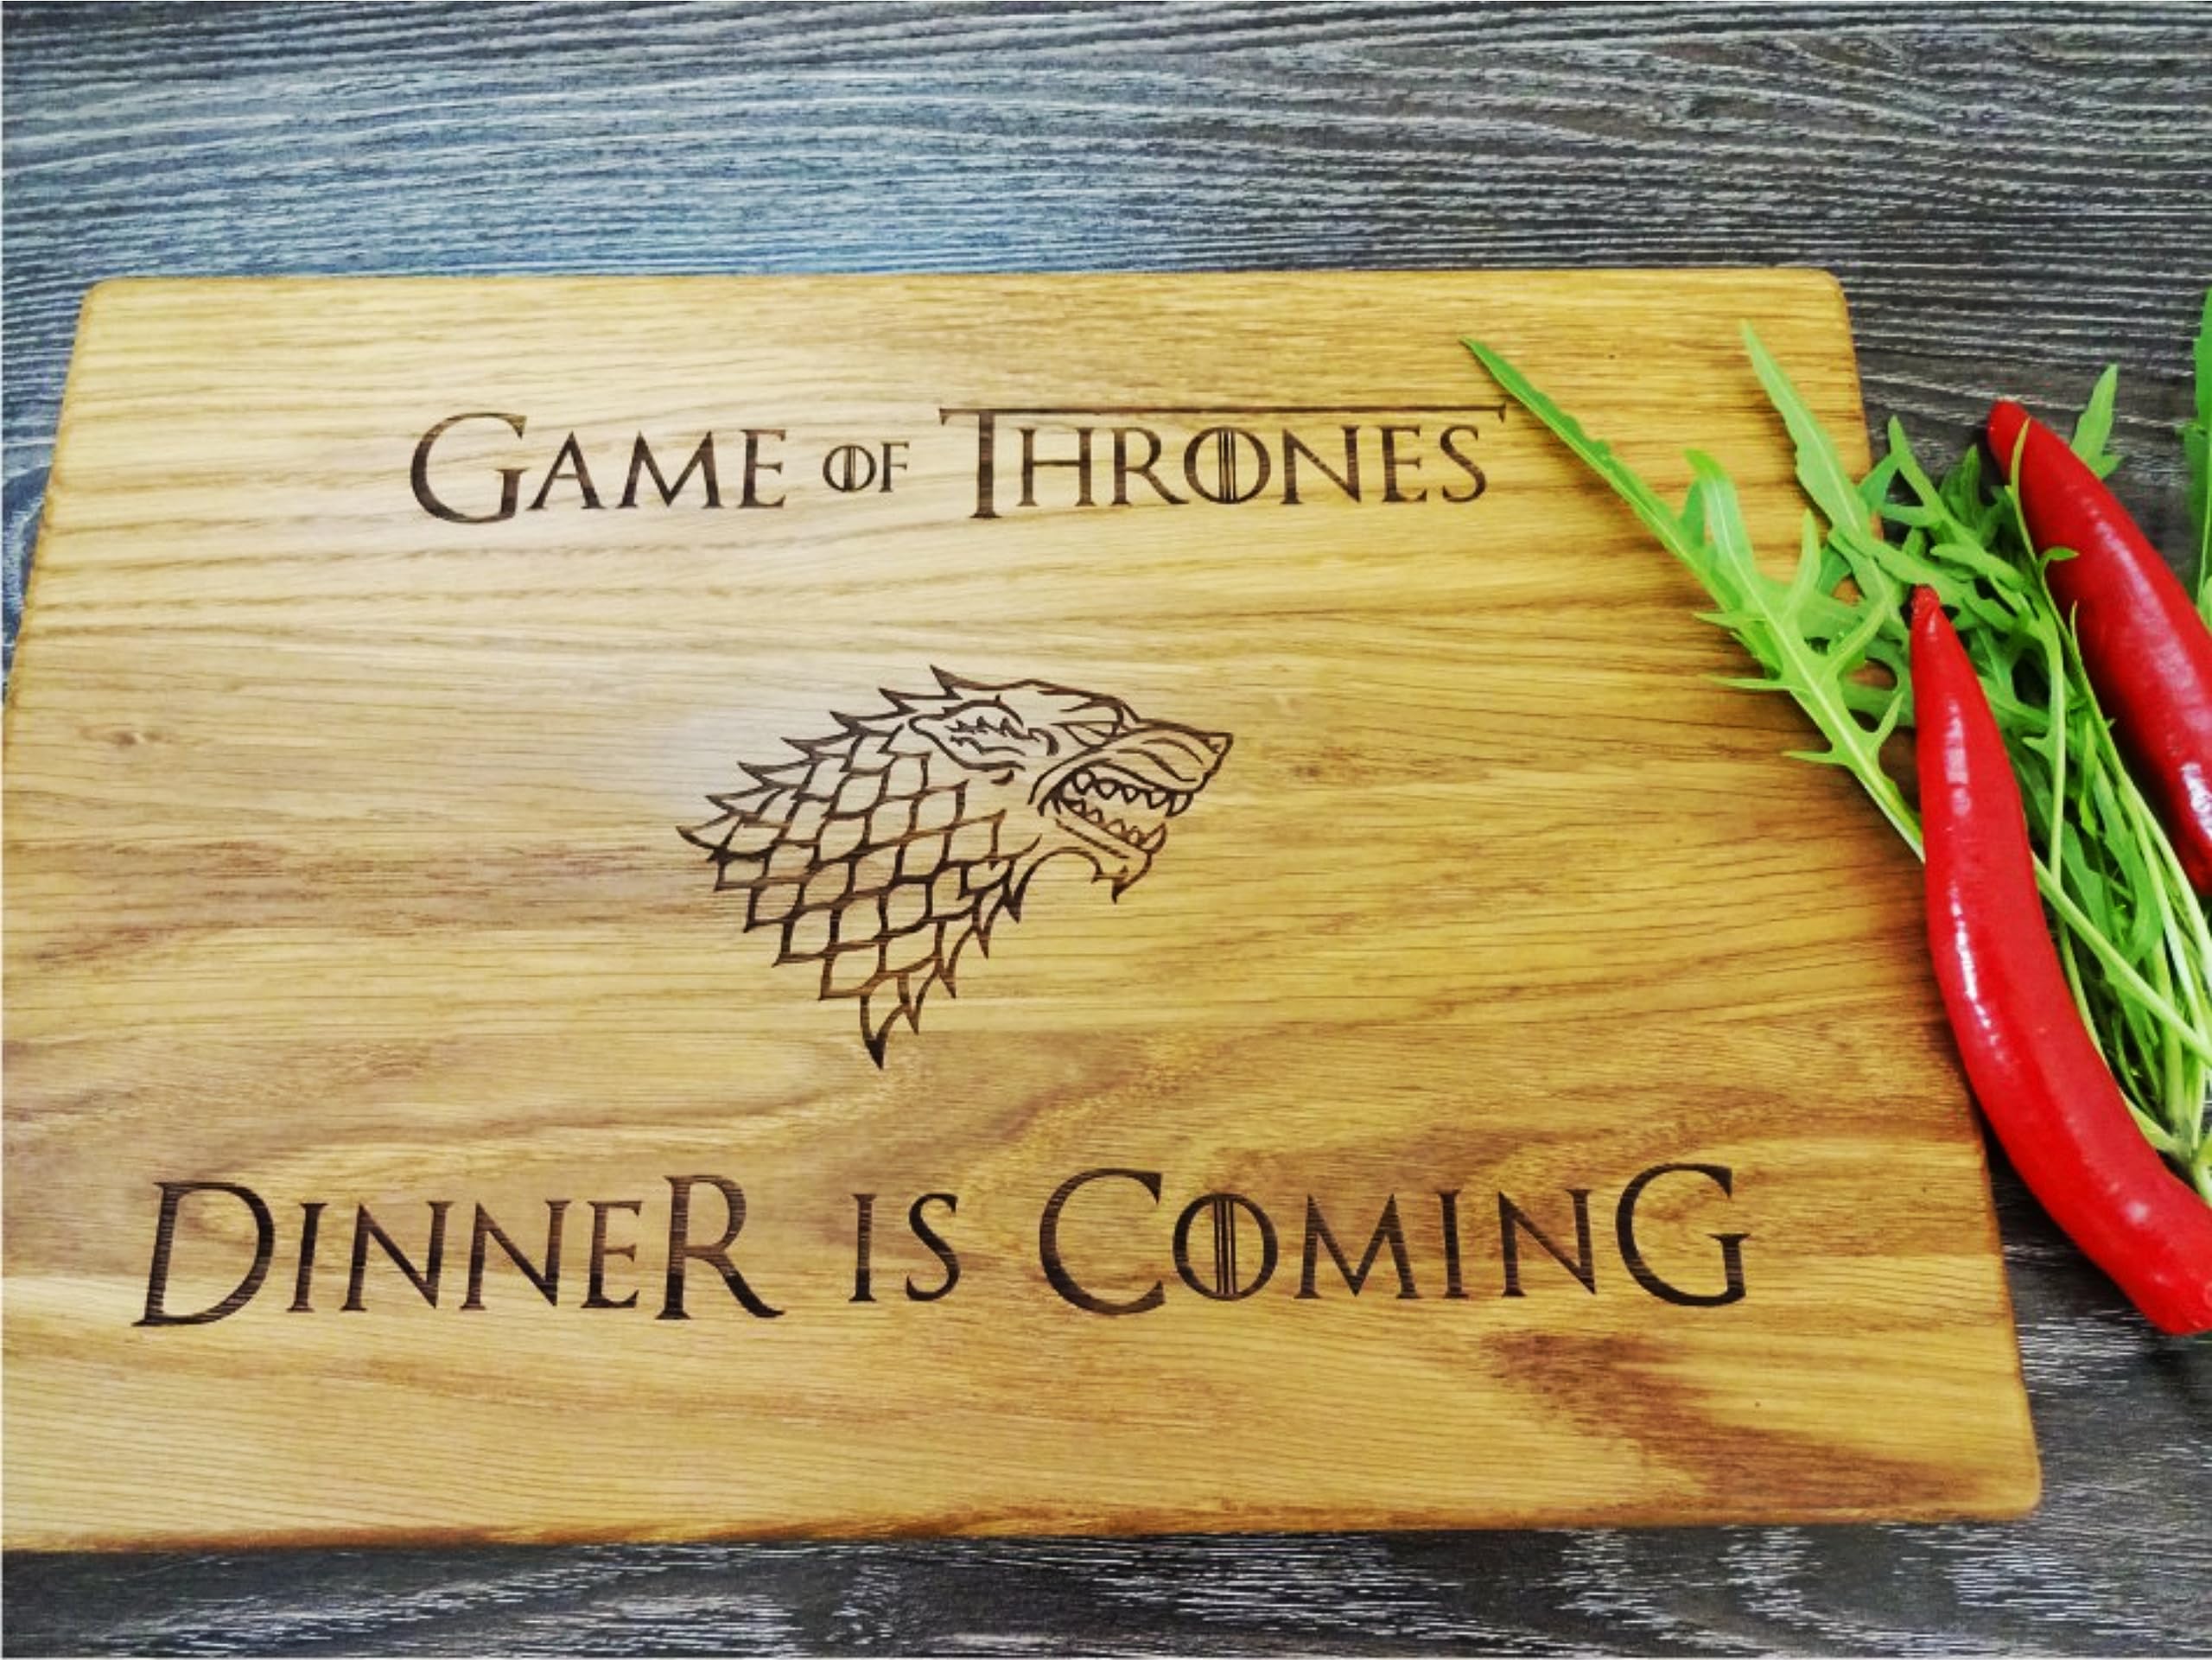 Algis Crafts | Chopping Board - DINNER IS COMING | Wedding Gifts for Couples, Anniversary Gift, First Home Gift | Handmade Birthday Gift | Laser Engraved Cutting Board